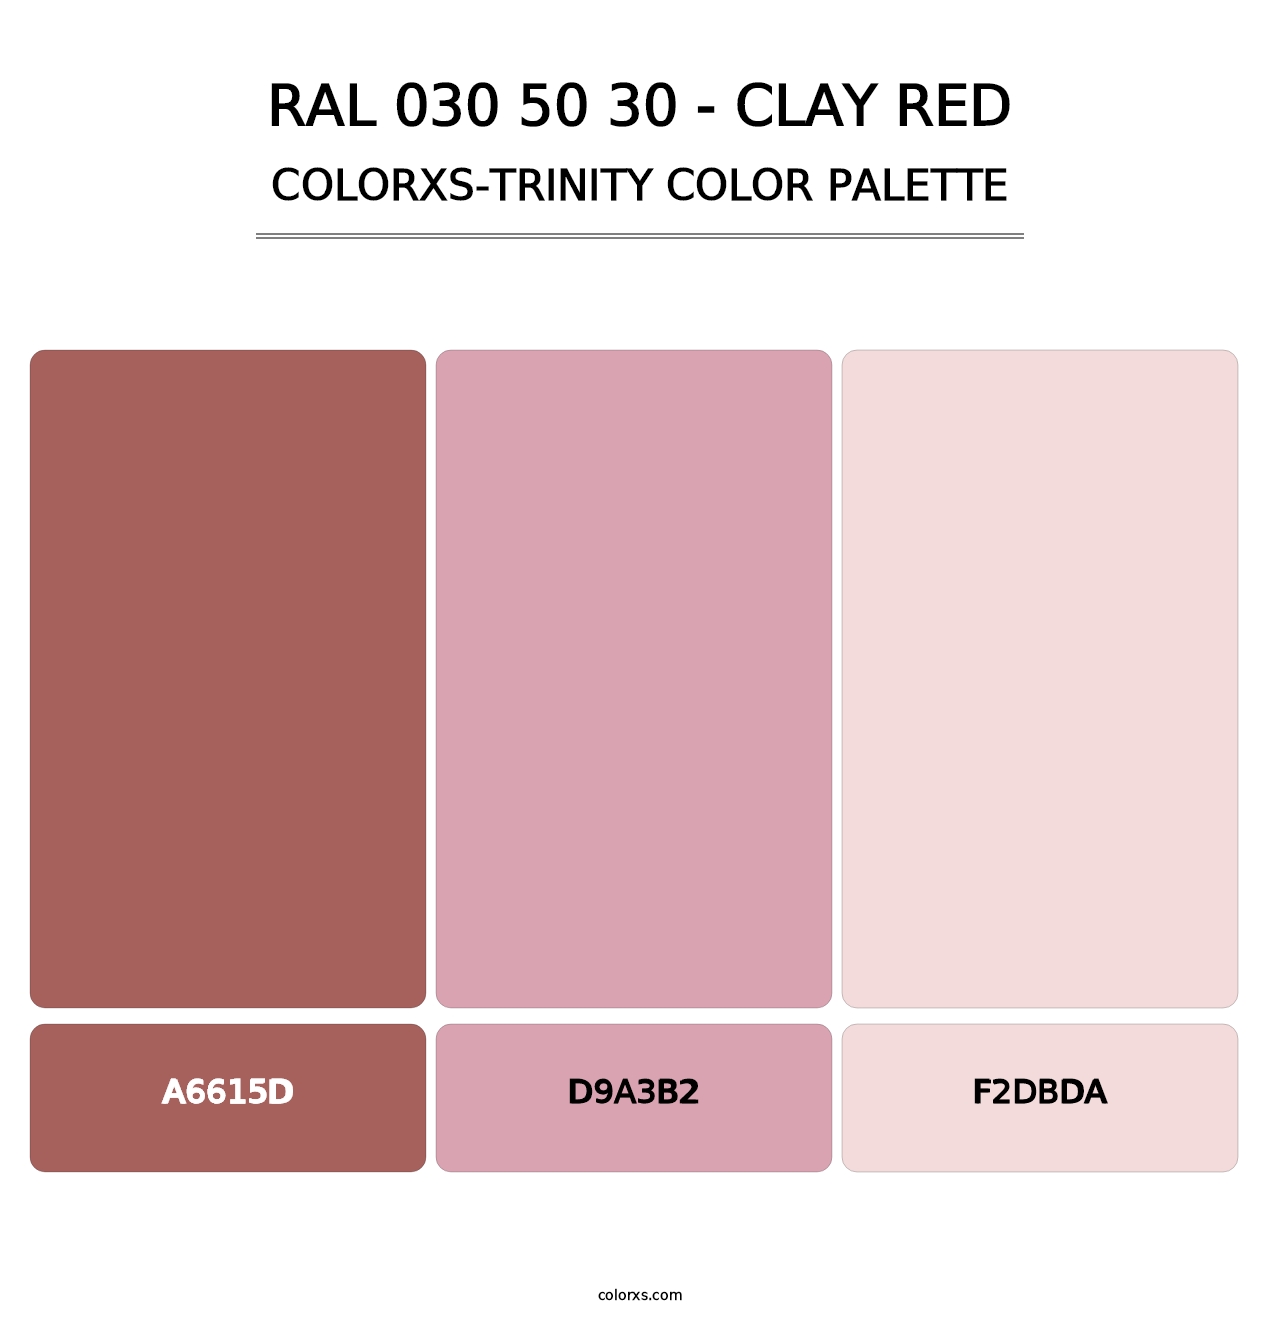 RAL 030 50 30 - Clay Red - Colorxs Trinity Palette